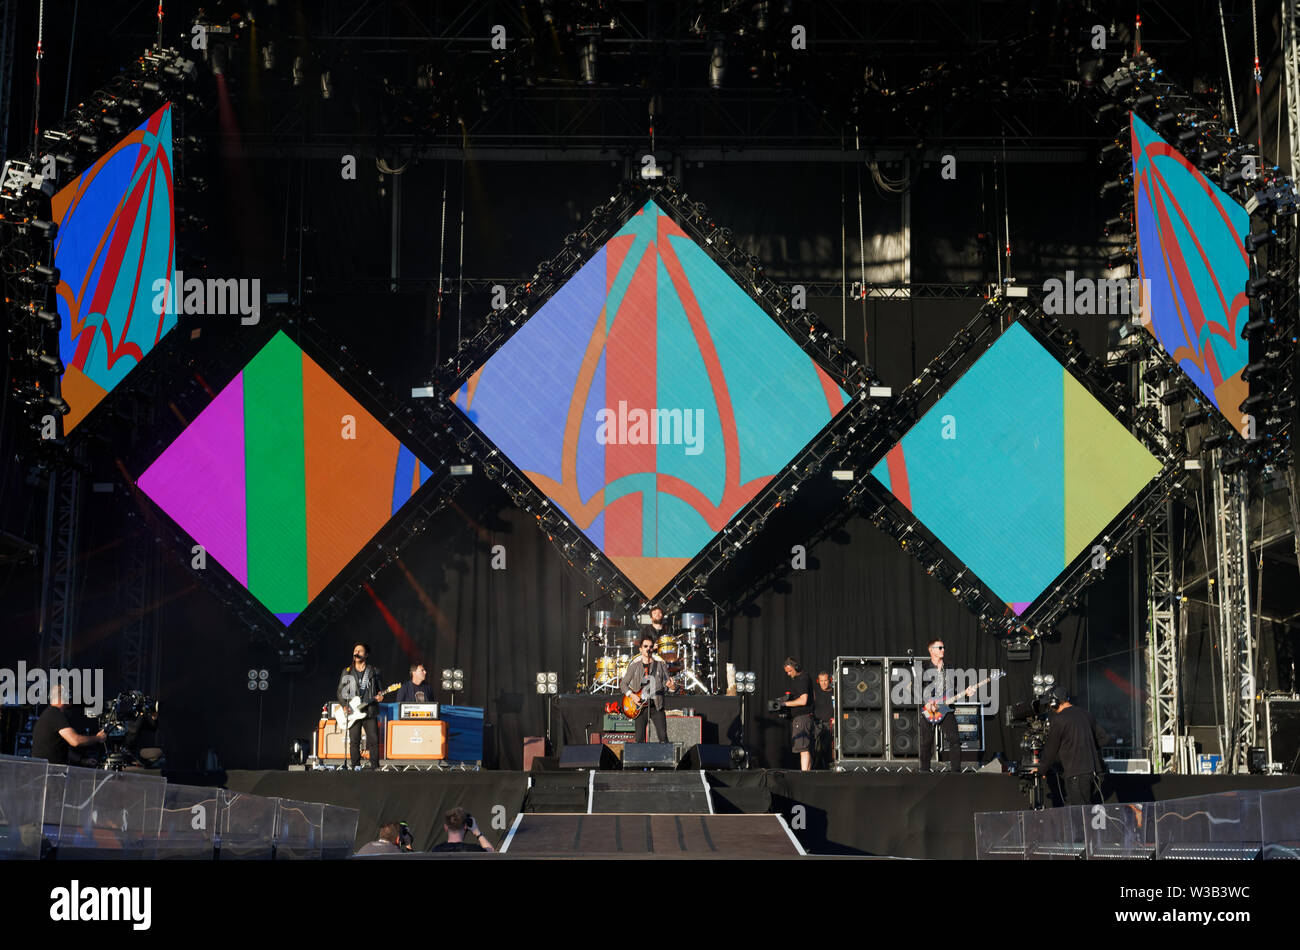 Swansea, UK. 13th July, 2019. Stereophinics perform on stage. Re: Stereophonics live concert at the Singleton Park in Swansea, Wales, UK. Credit: ATHENA PICTURE AGENCY LTD/Alamy Live News Stock Photo